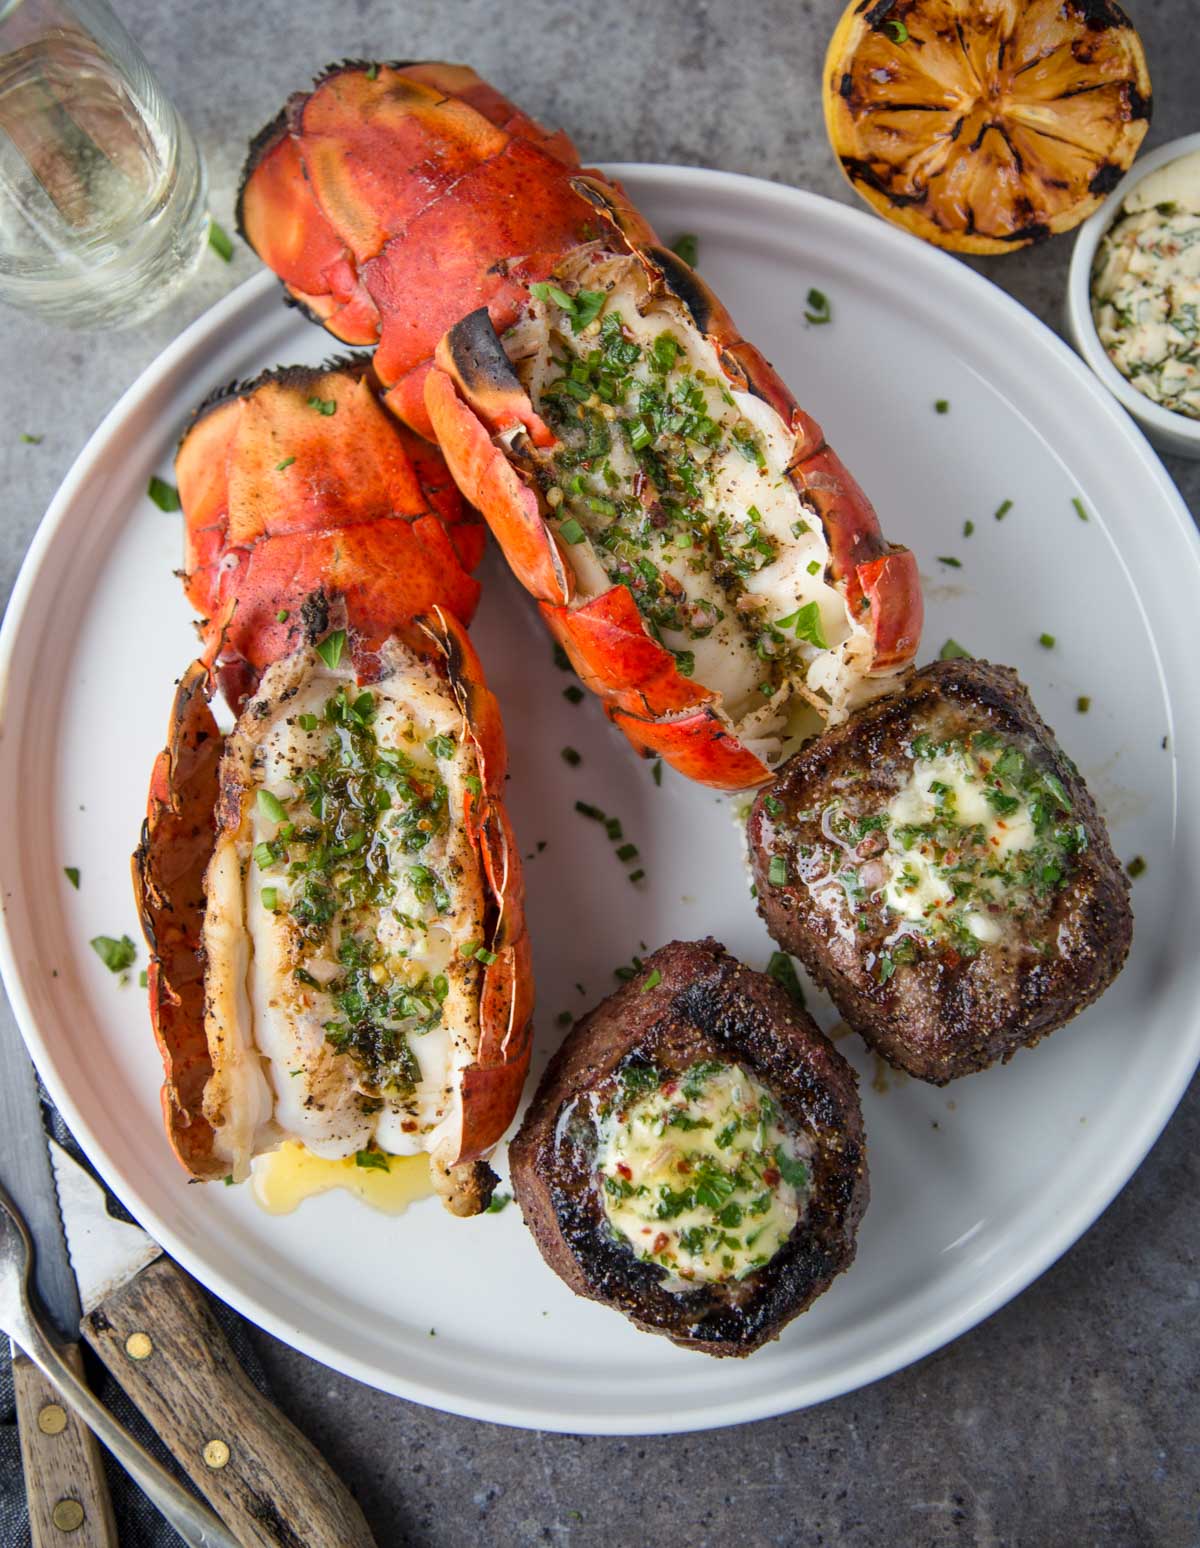 Surf and Turf with Grilled Lobster and Filet Mignon